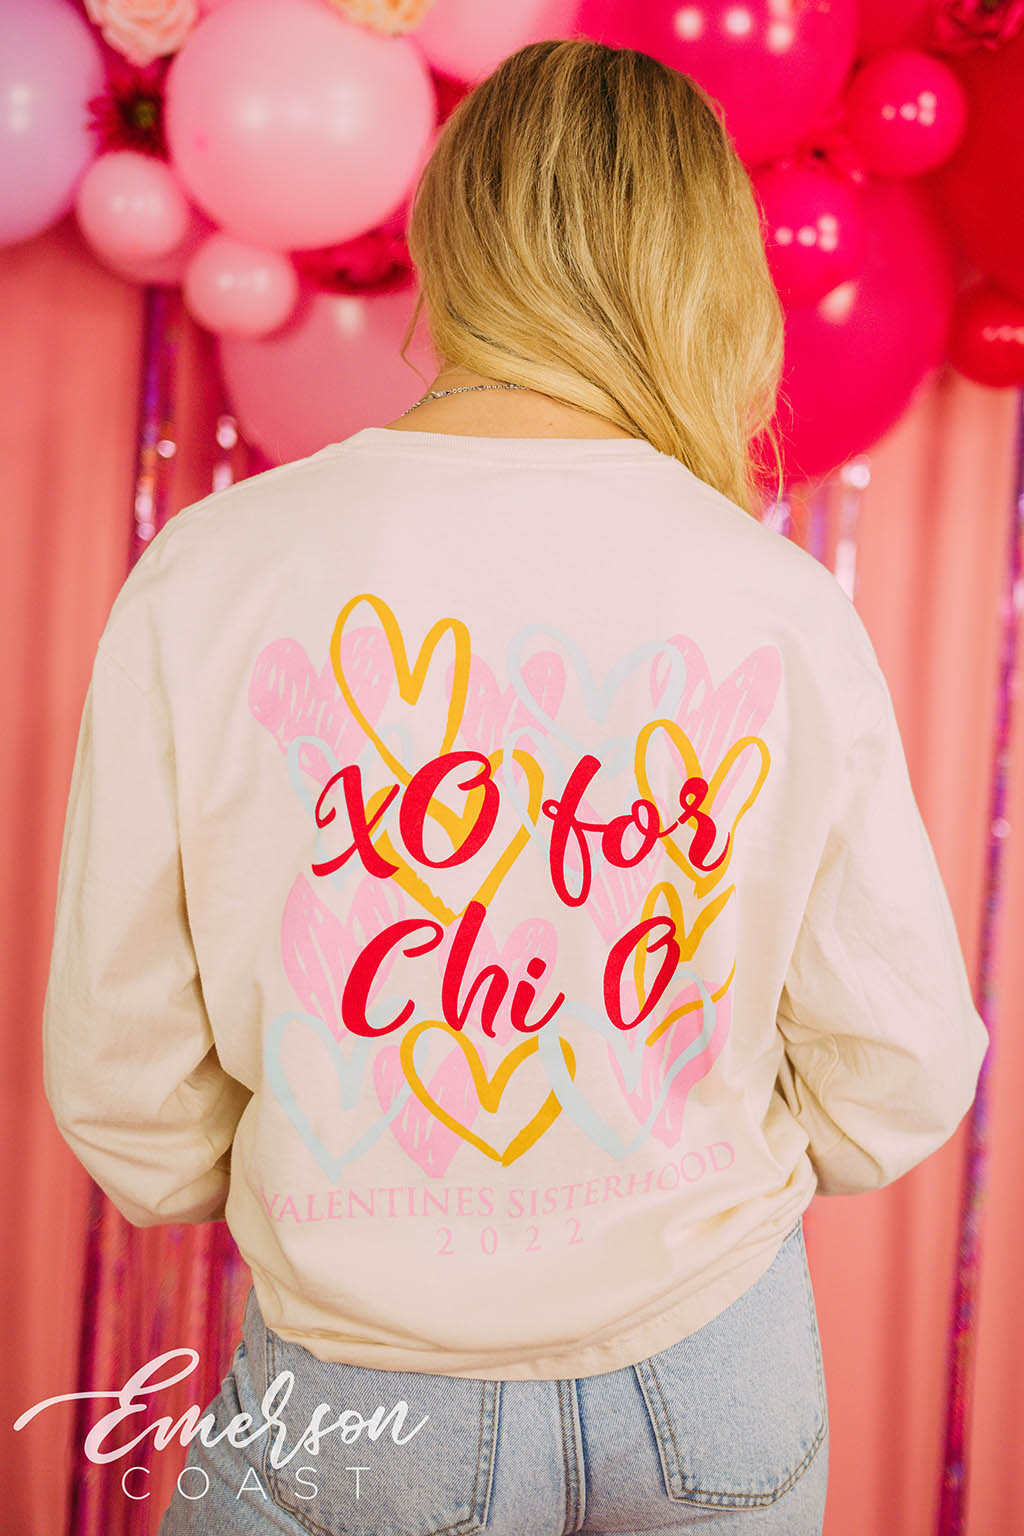 Chi O Xo For Chi O Valentines Day Long Sleeve Tee